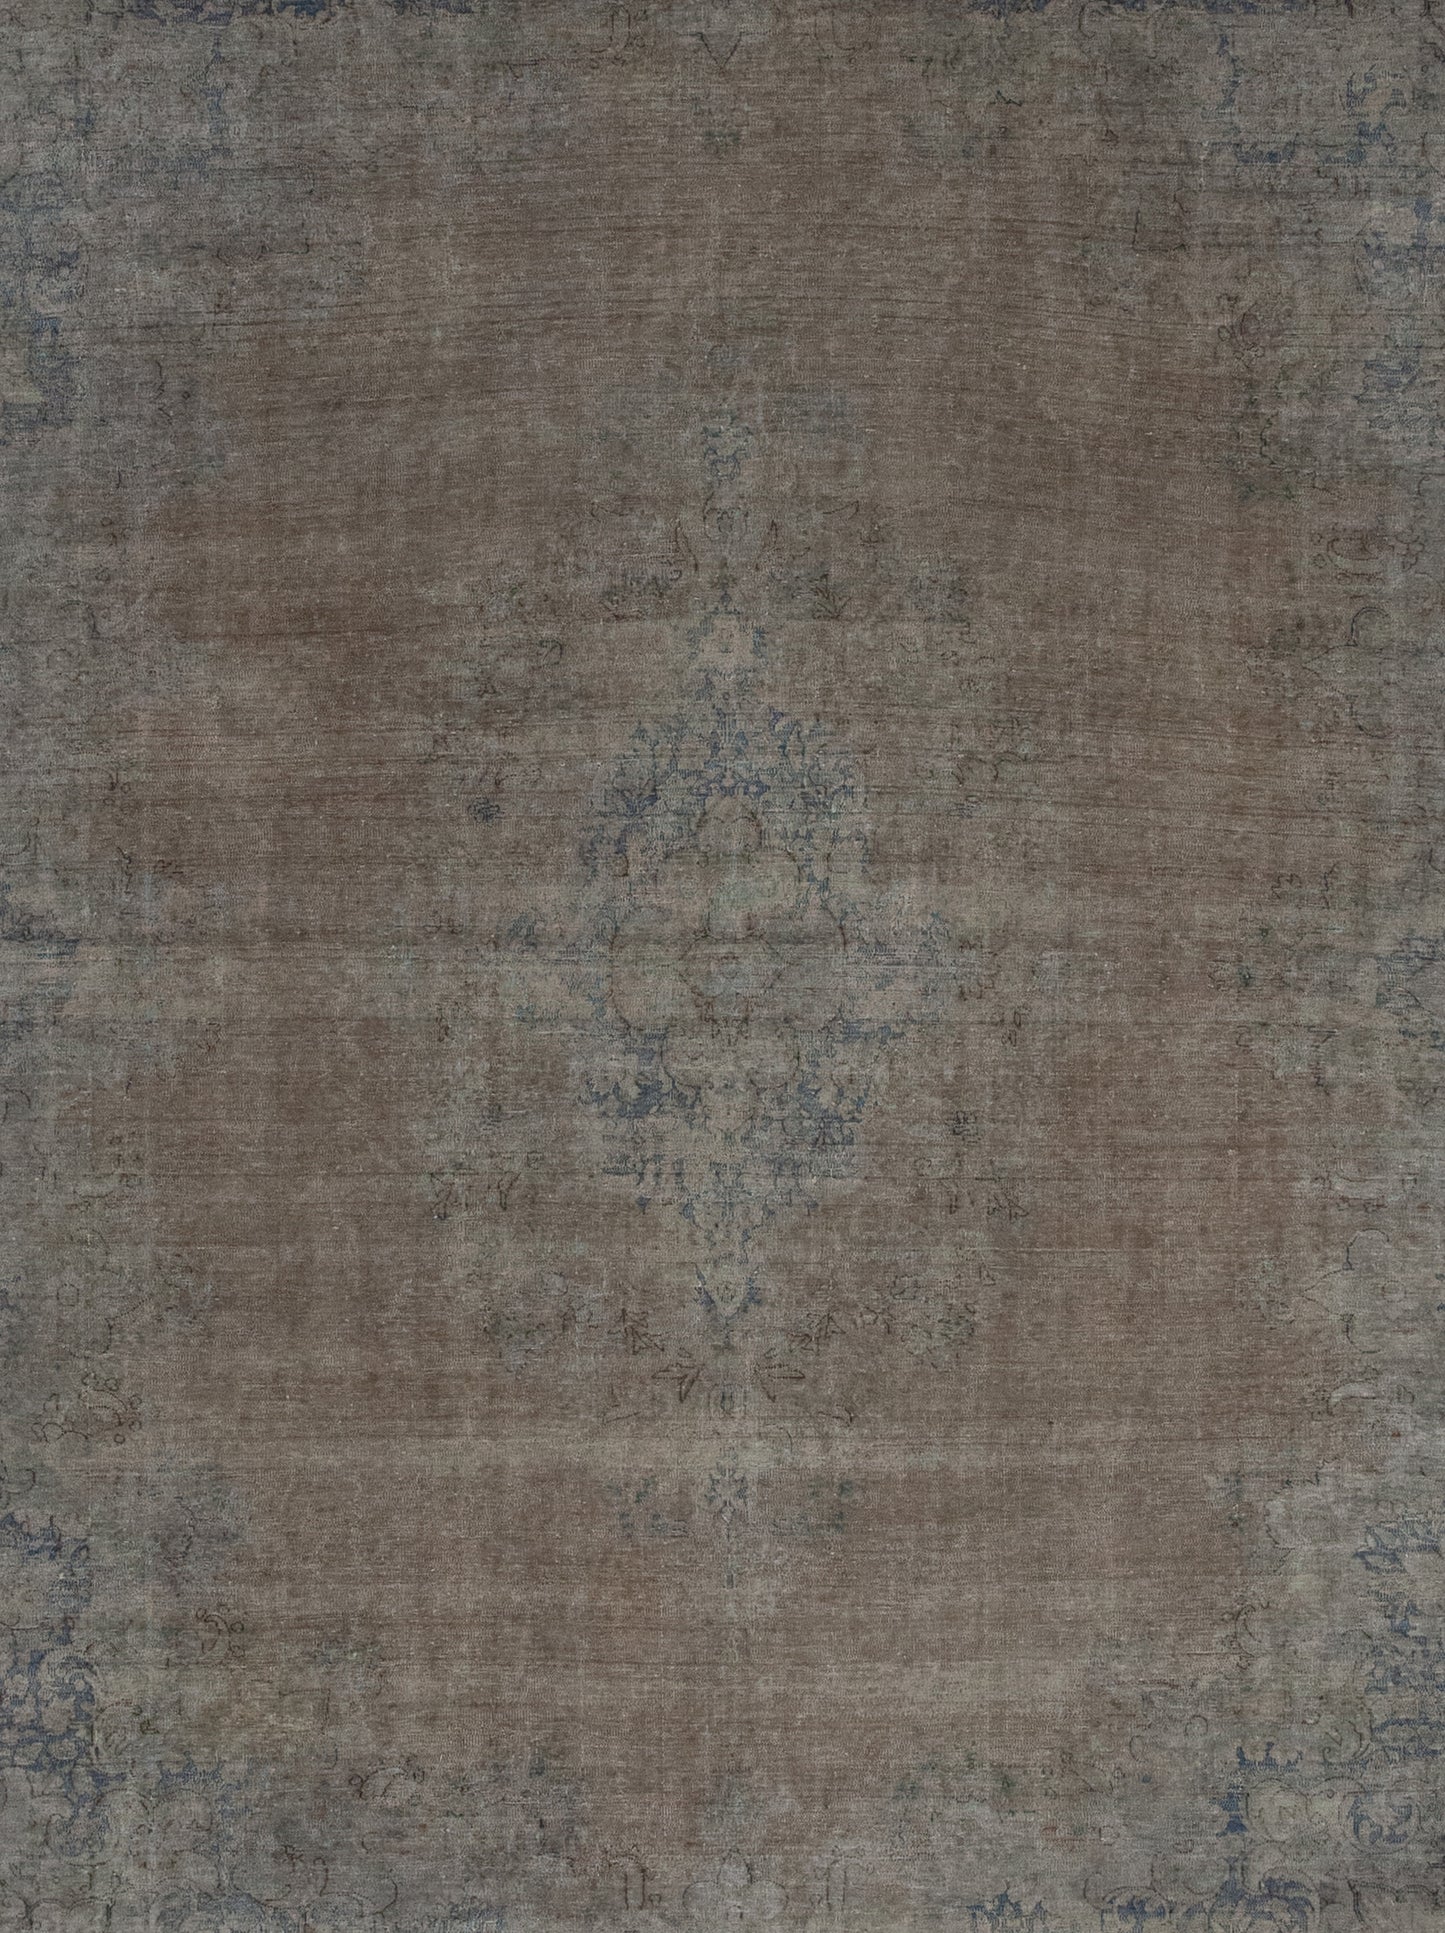 The center of this rug shows a distressed copper color enclosing a small flower in the center.